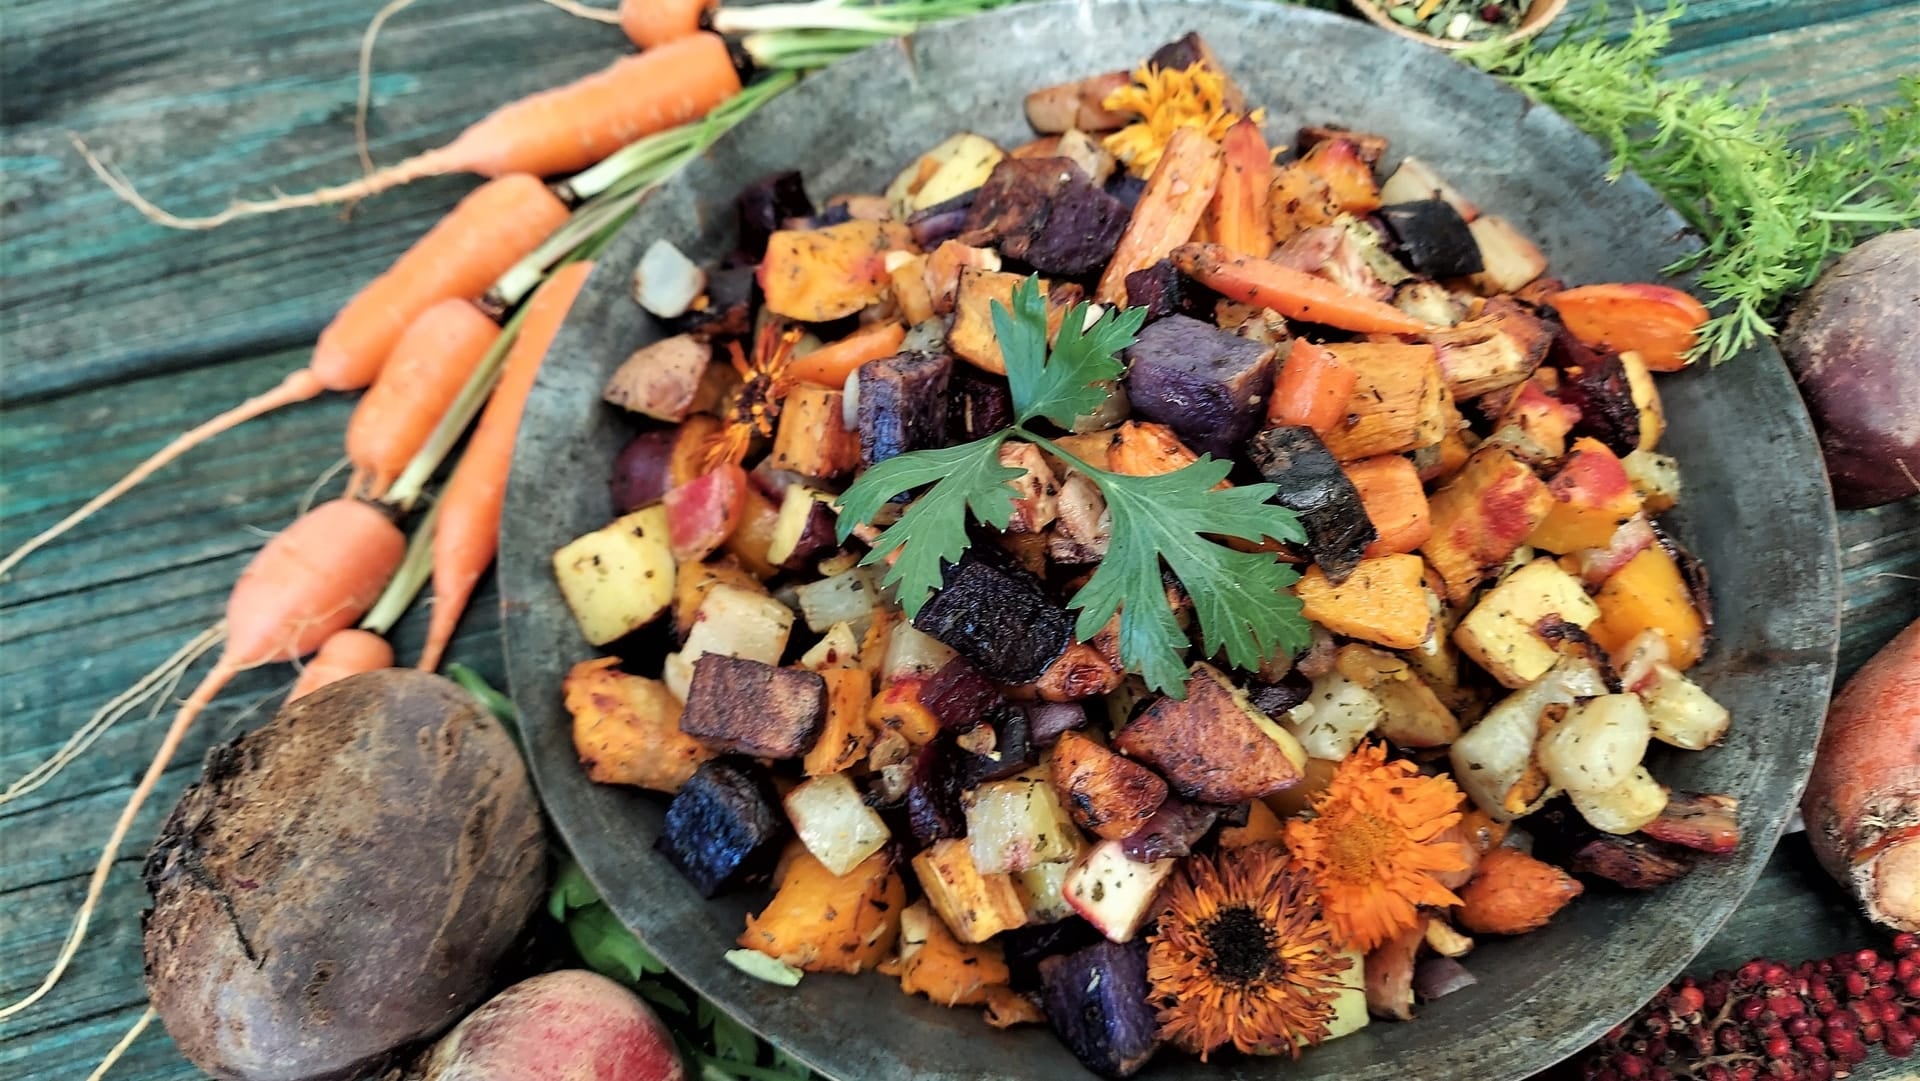  A colorful platter of roasted root vegetables with fresh vegetables around them